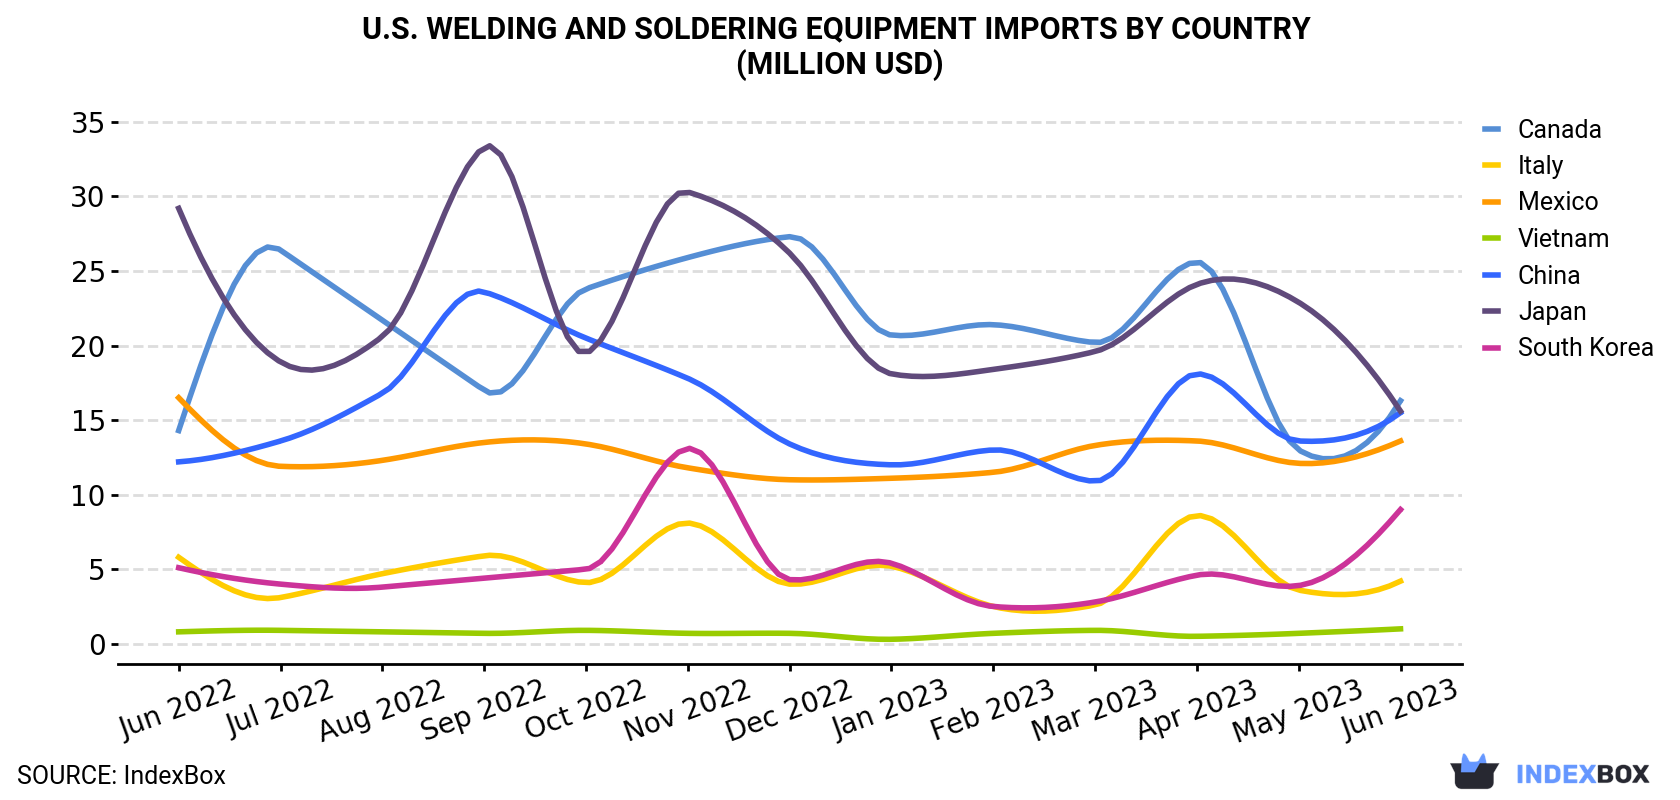 U.S. Welding And Soldering Equipment Imports By Country (Million USD)